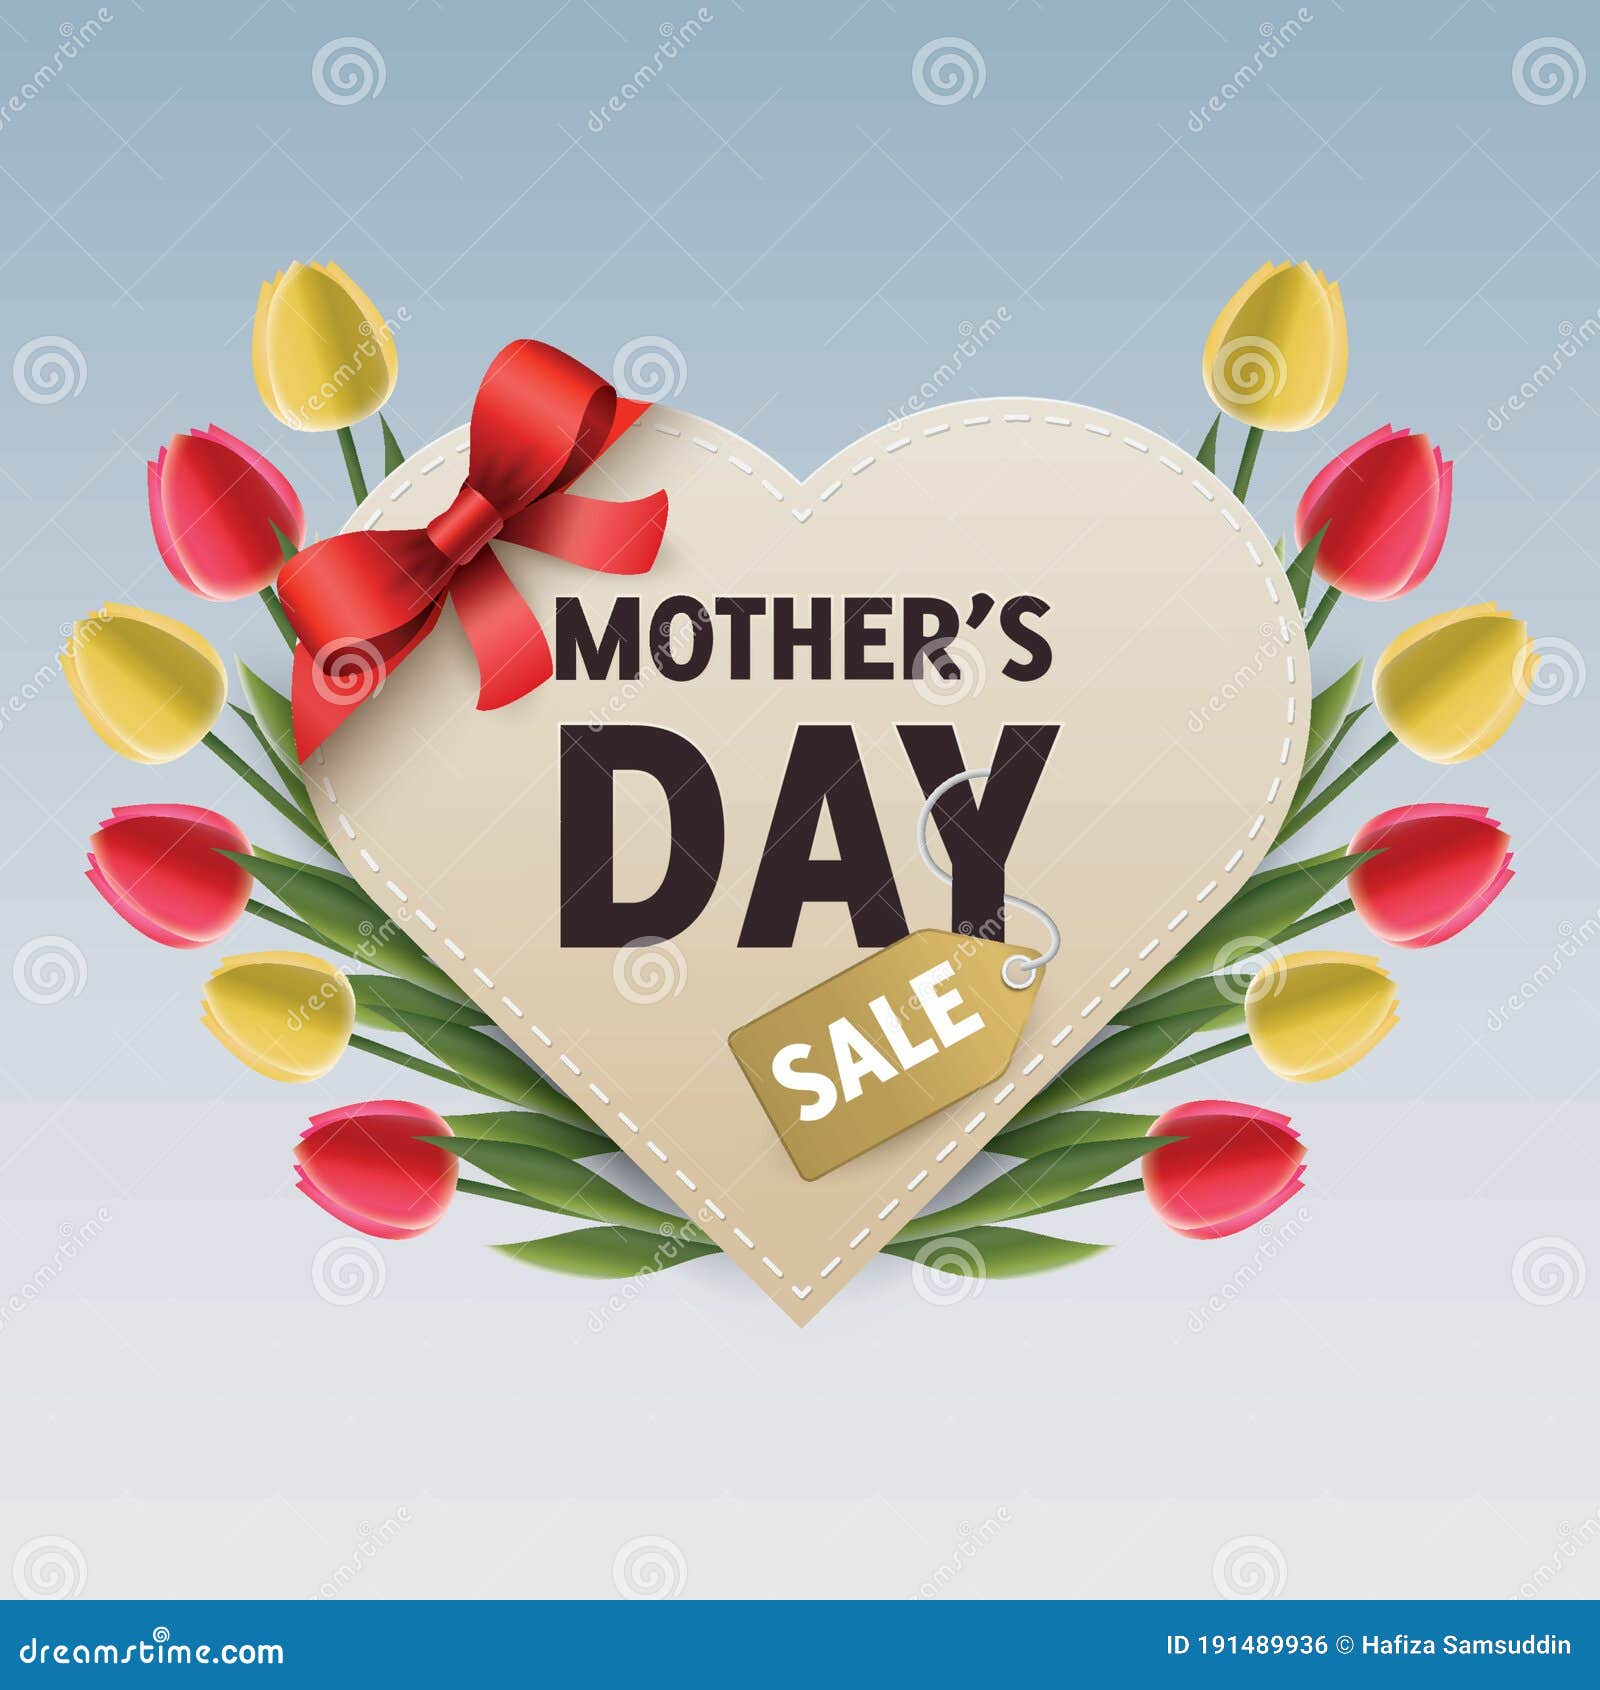 Happy Mothers Day Sales Concept. Stock Vector Illustration of